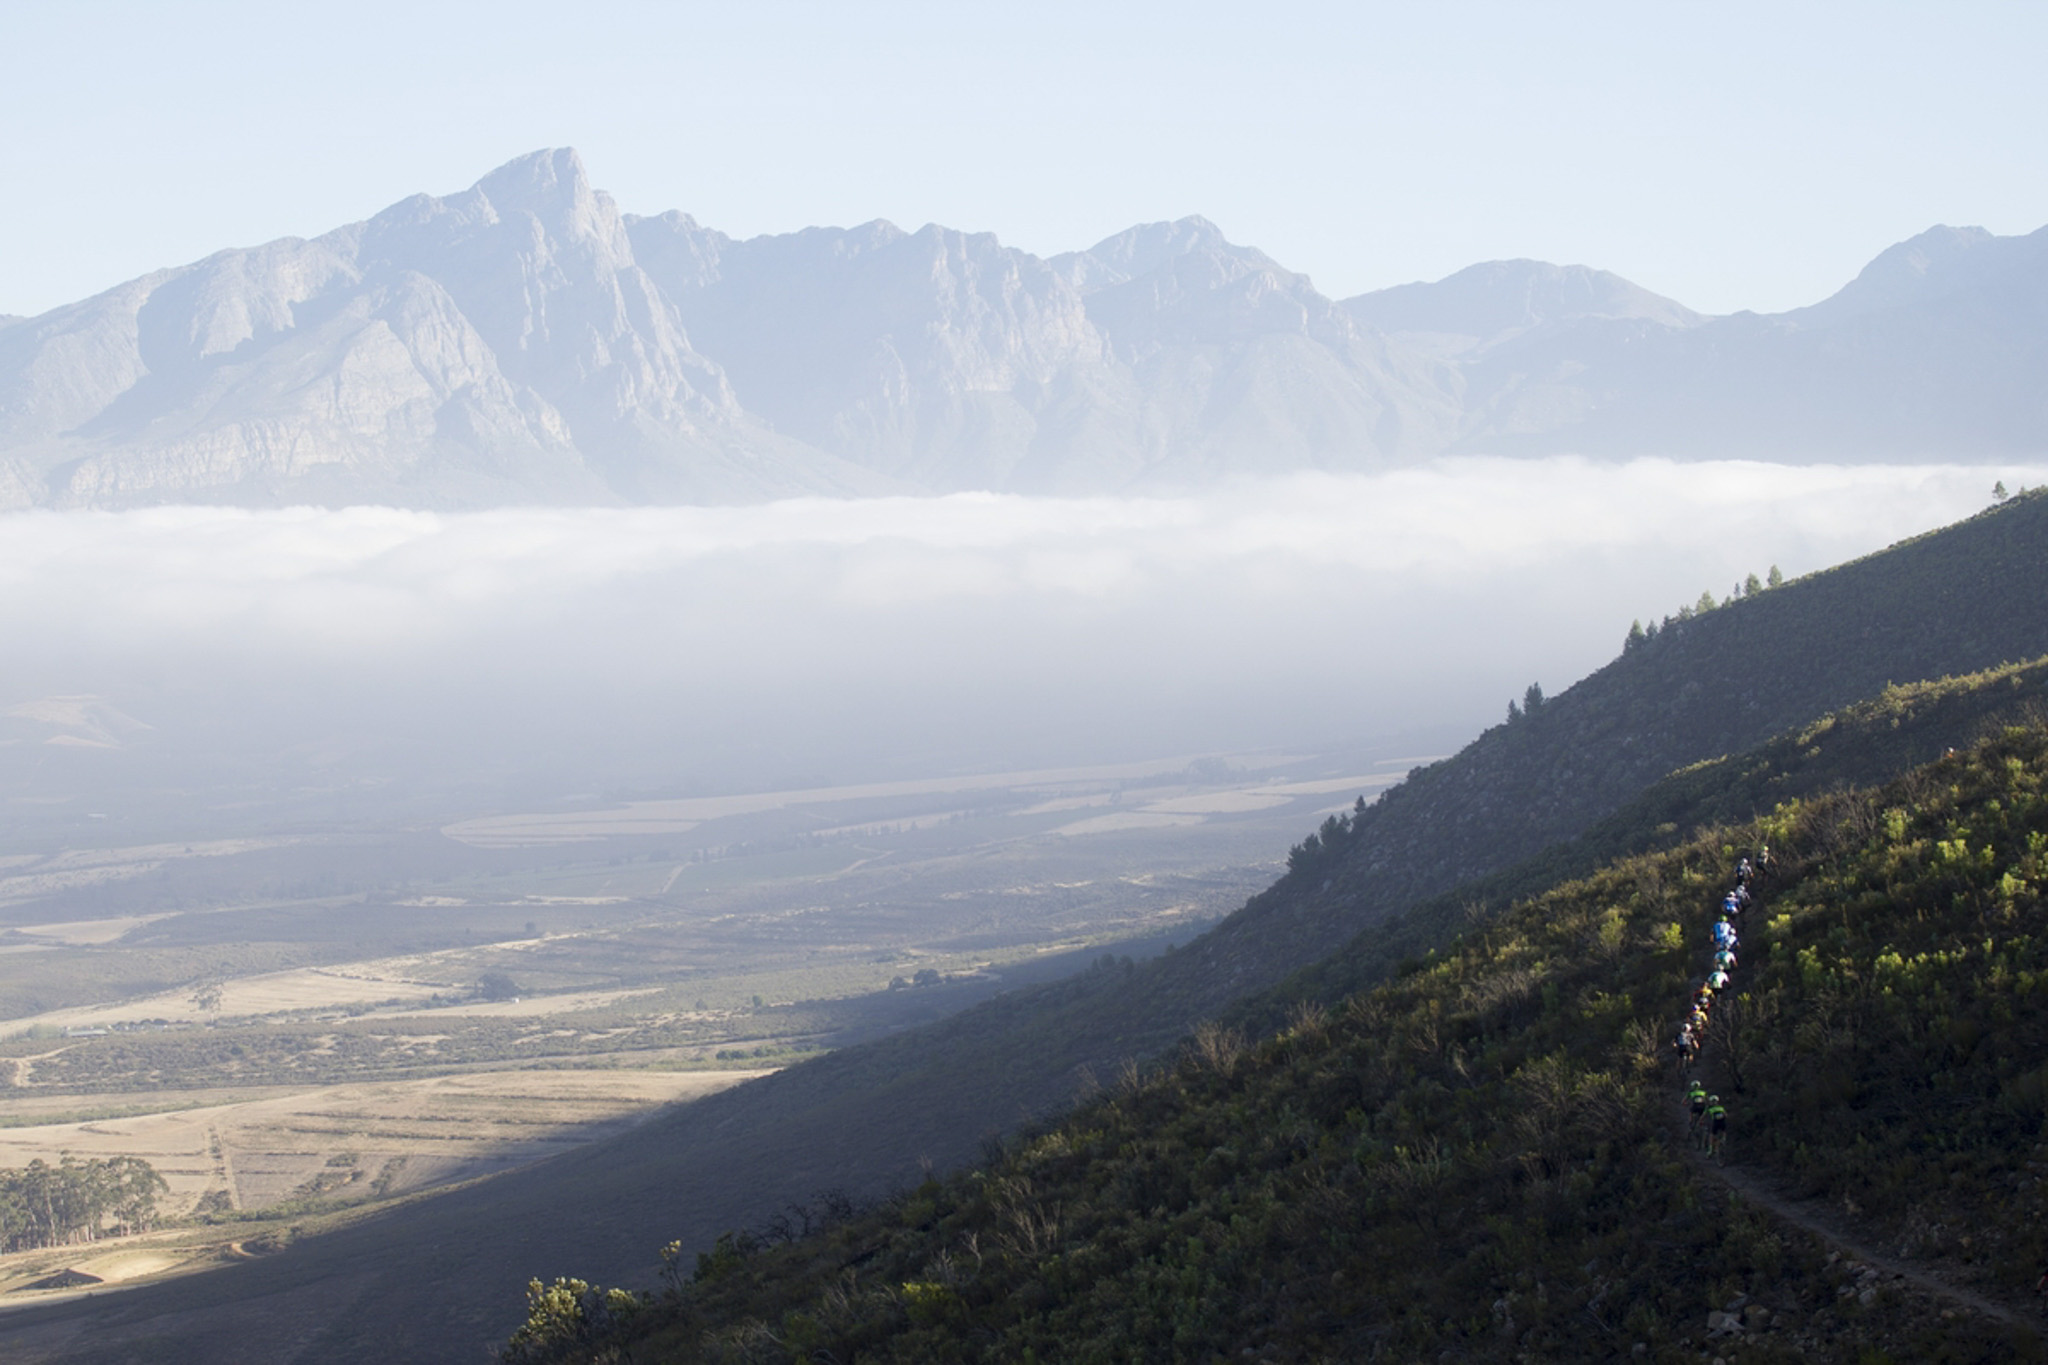 Riders during stage 2 of the 2016 Absa Cape Epic Mountain Bike stage race from Saronsberg Wine Estate in Tulbagh, South Africa on the 15th March 2016 Photo by Gary Perkin/Cape Epic/SPORTZPICS PLEASE ENSURE THE APPROPRIATE CREDIT IS GIVEN TO THE PHOTOGRAPHER AND SPORTZPICS ALONG WITH THE ABSA CAPE EPIC ace2016